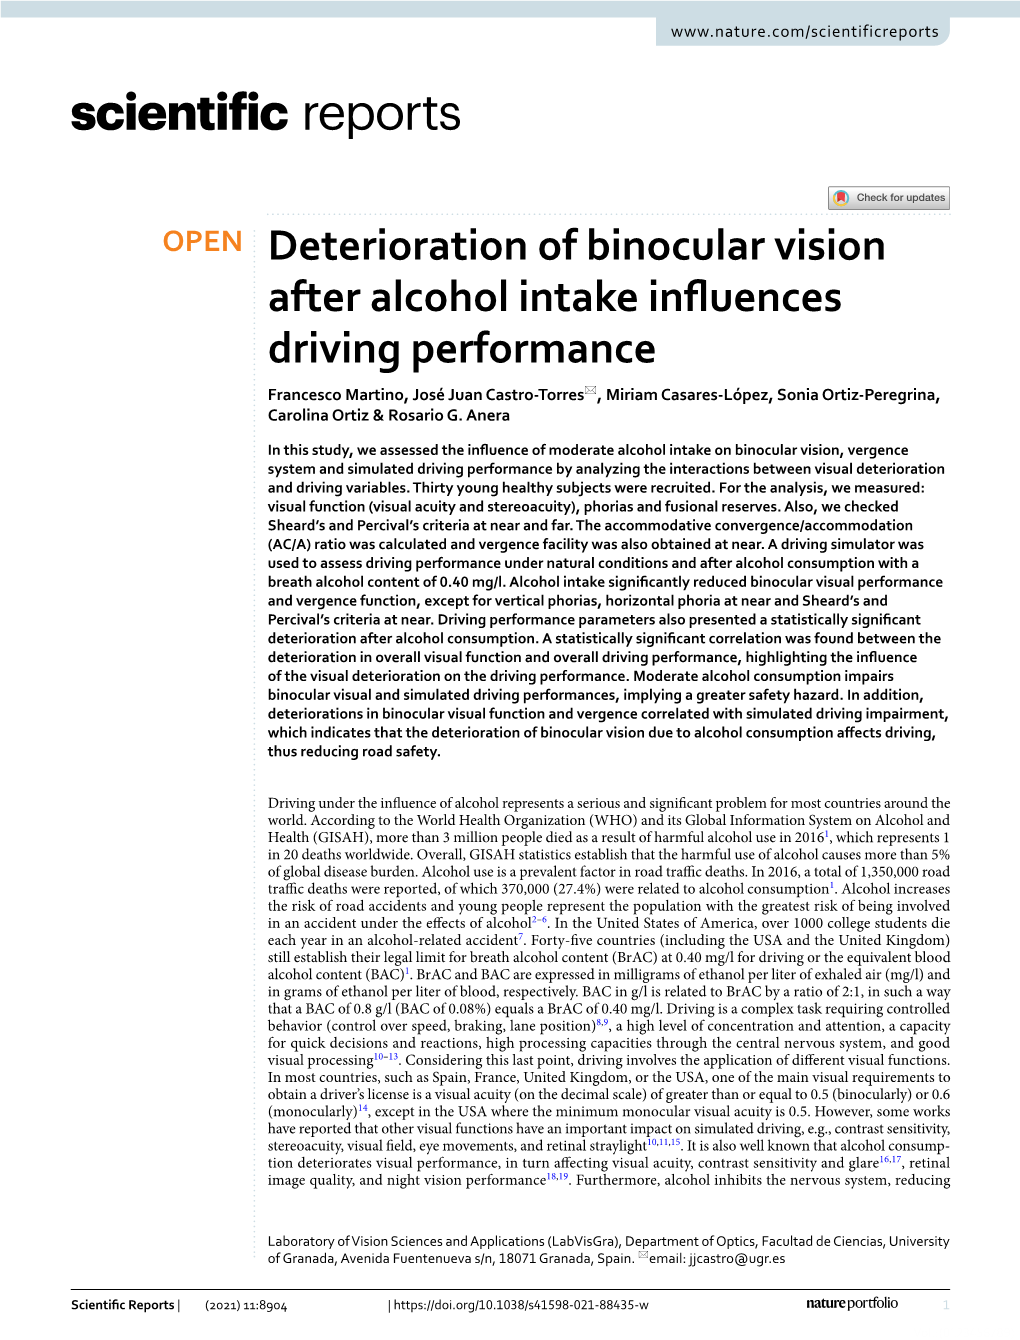 Deterioration of Binocular Vision After Alcohol Intake Influences Driving